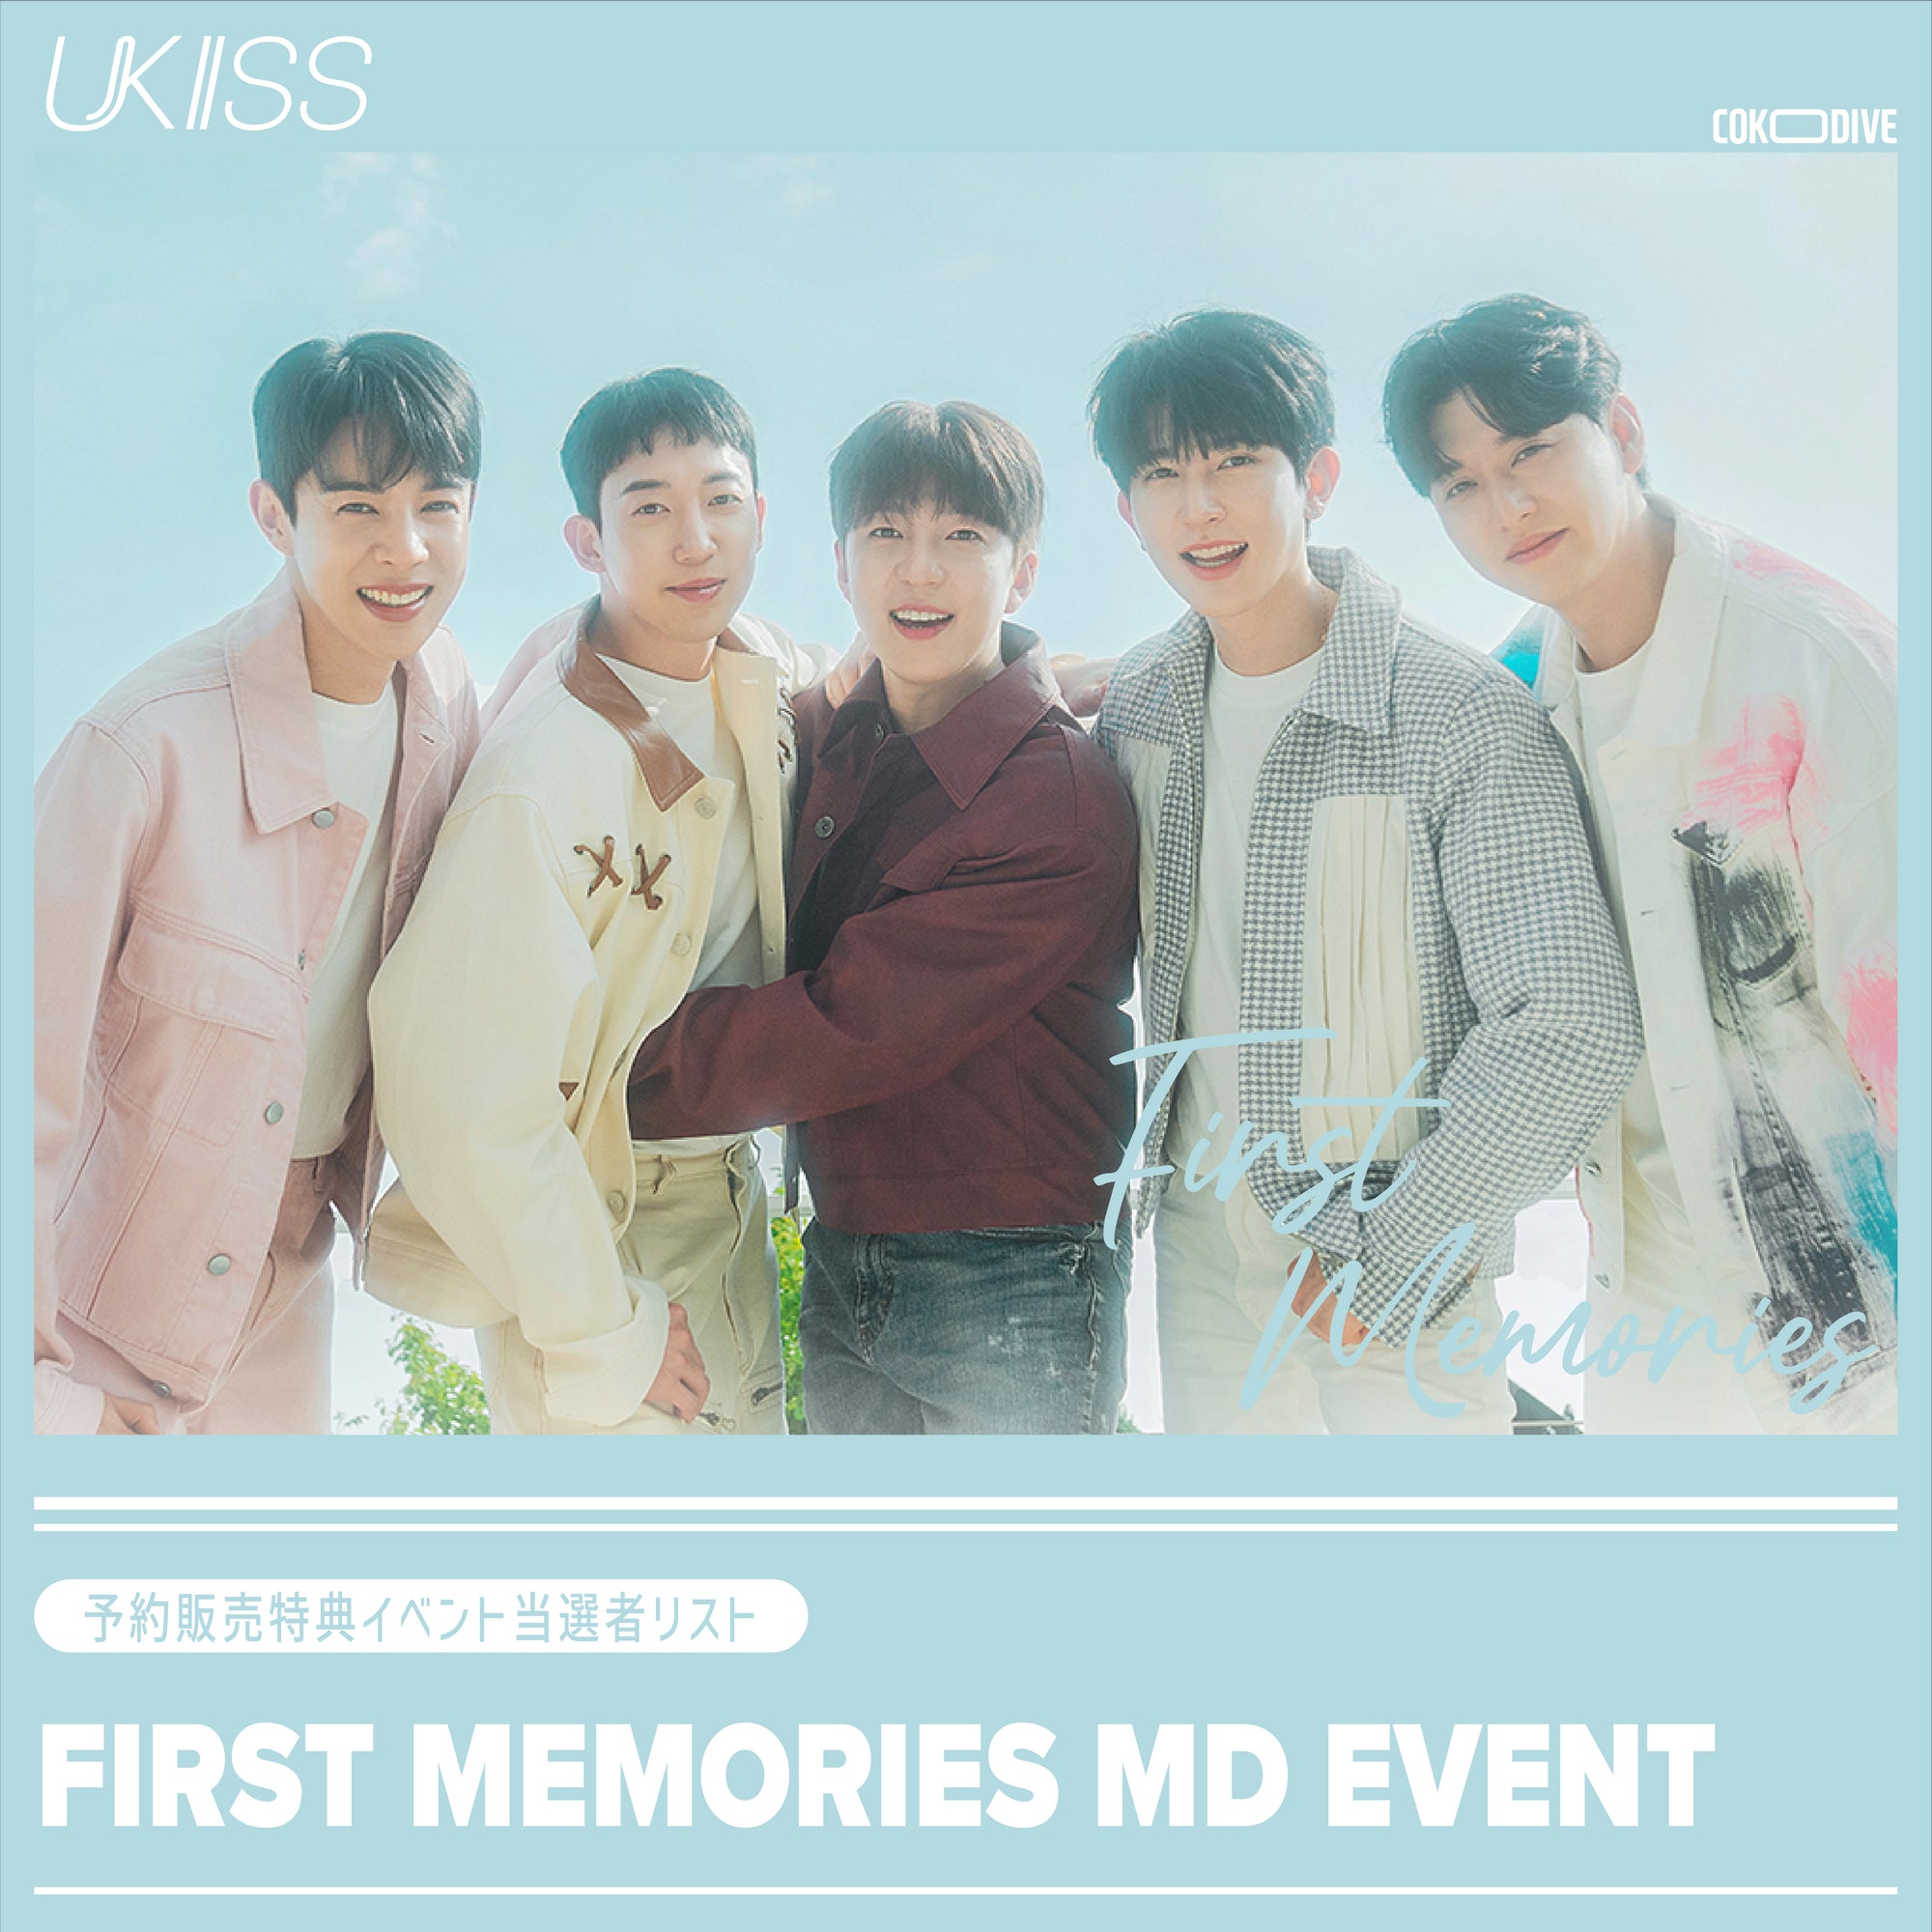 UKISS - FIRST MEMORIES 1ST FAN MEETING OFFICIAL MD EVENT ANNOUNCEMENT OF THE WINNERS